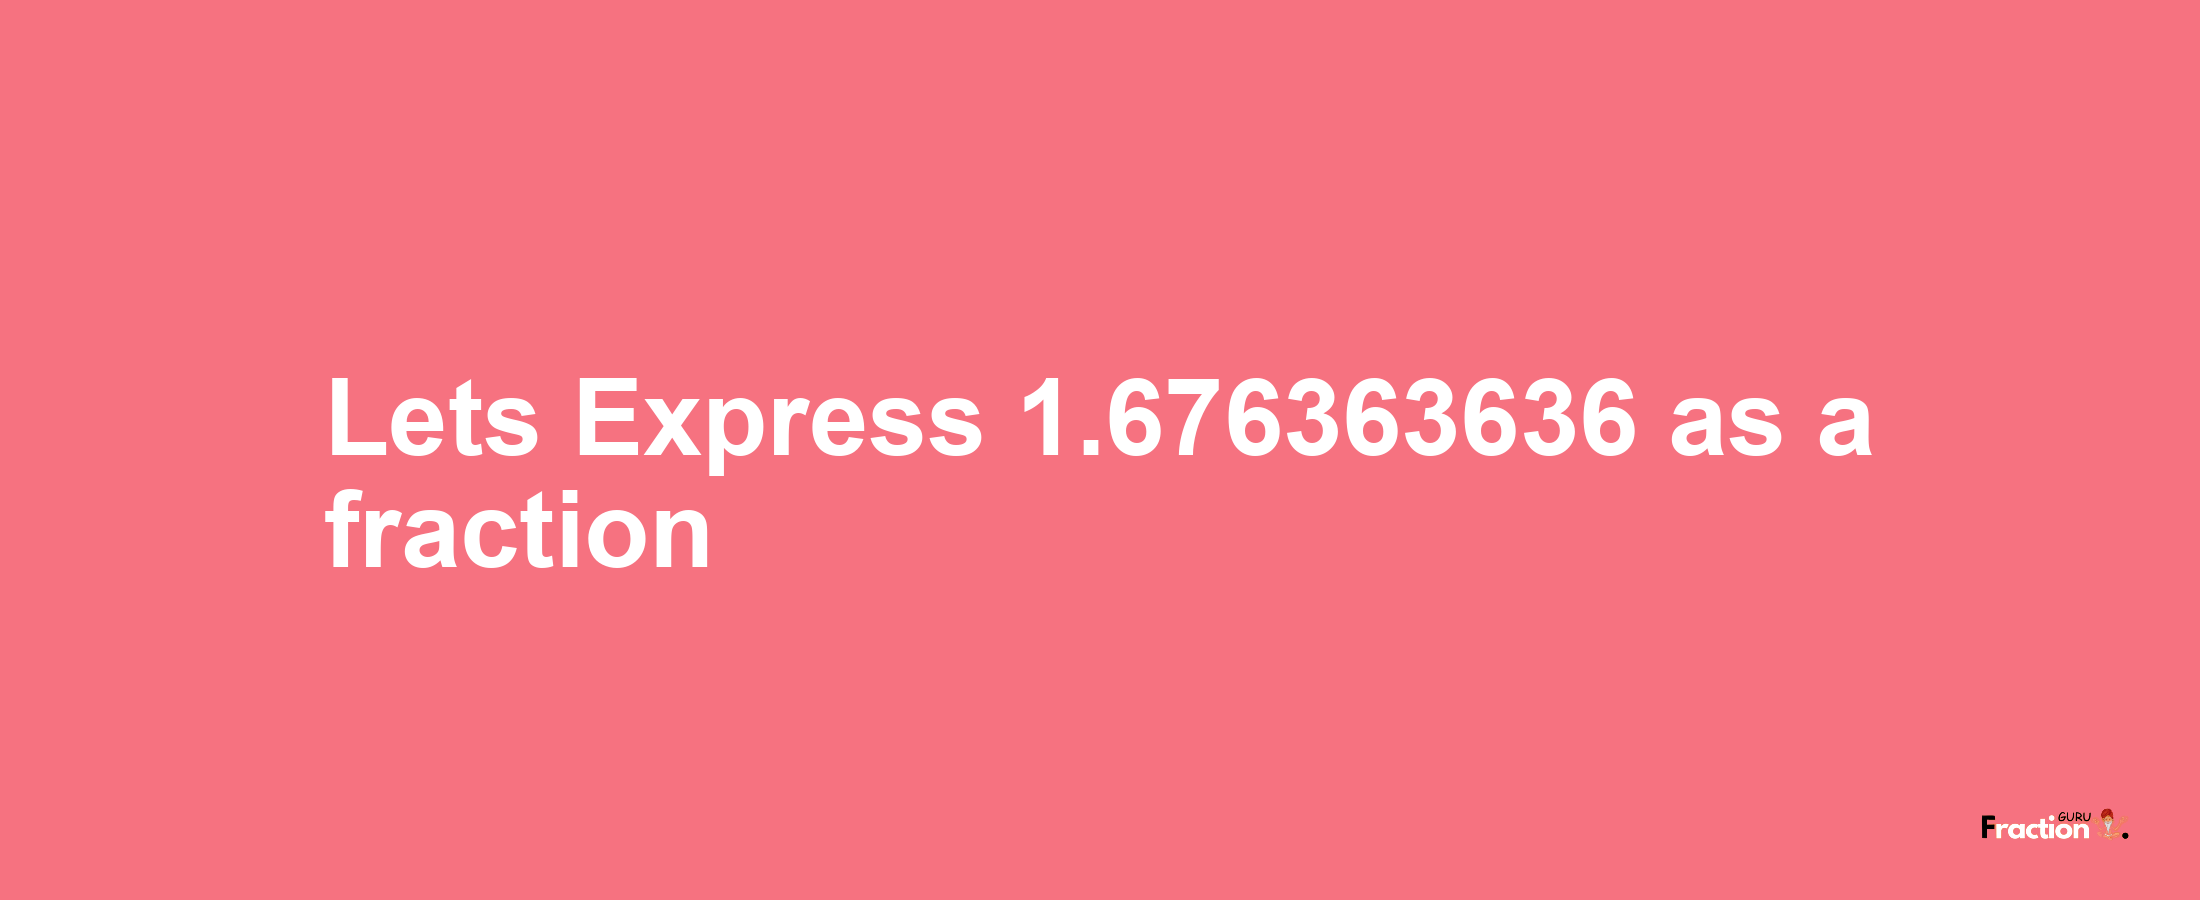 Lets Express 1.676363636 as afraction